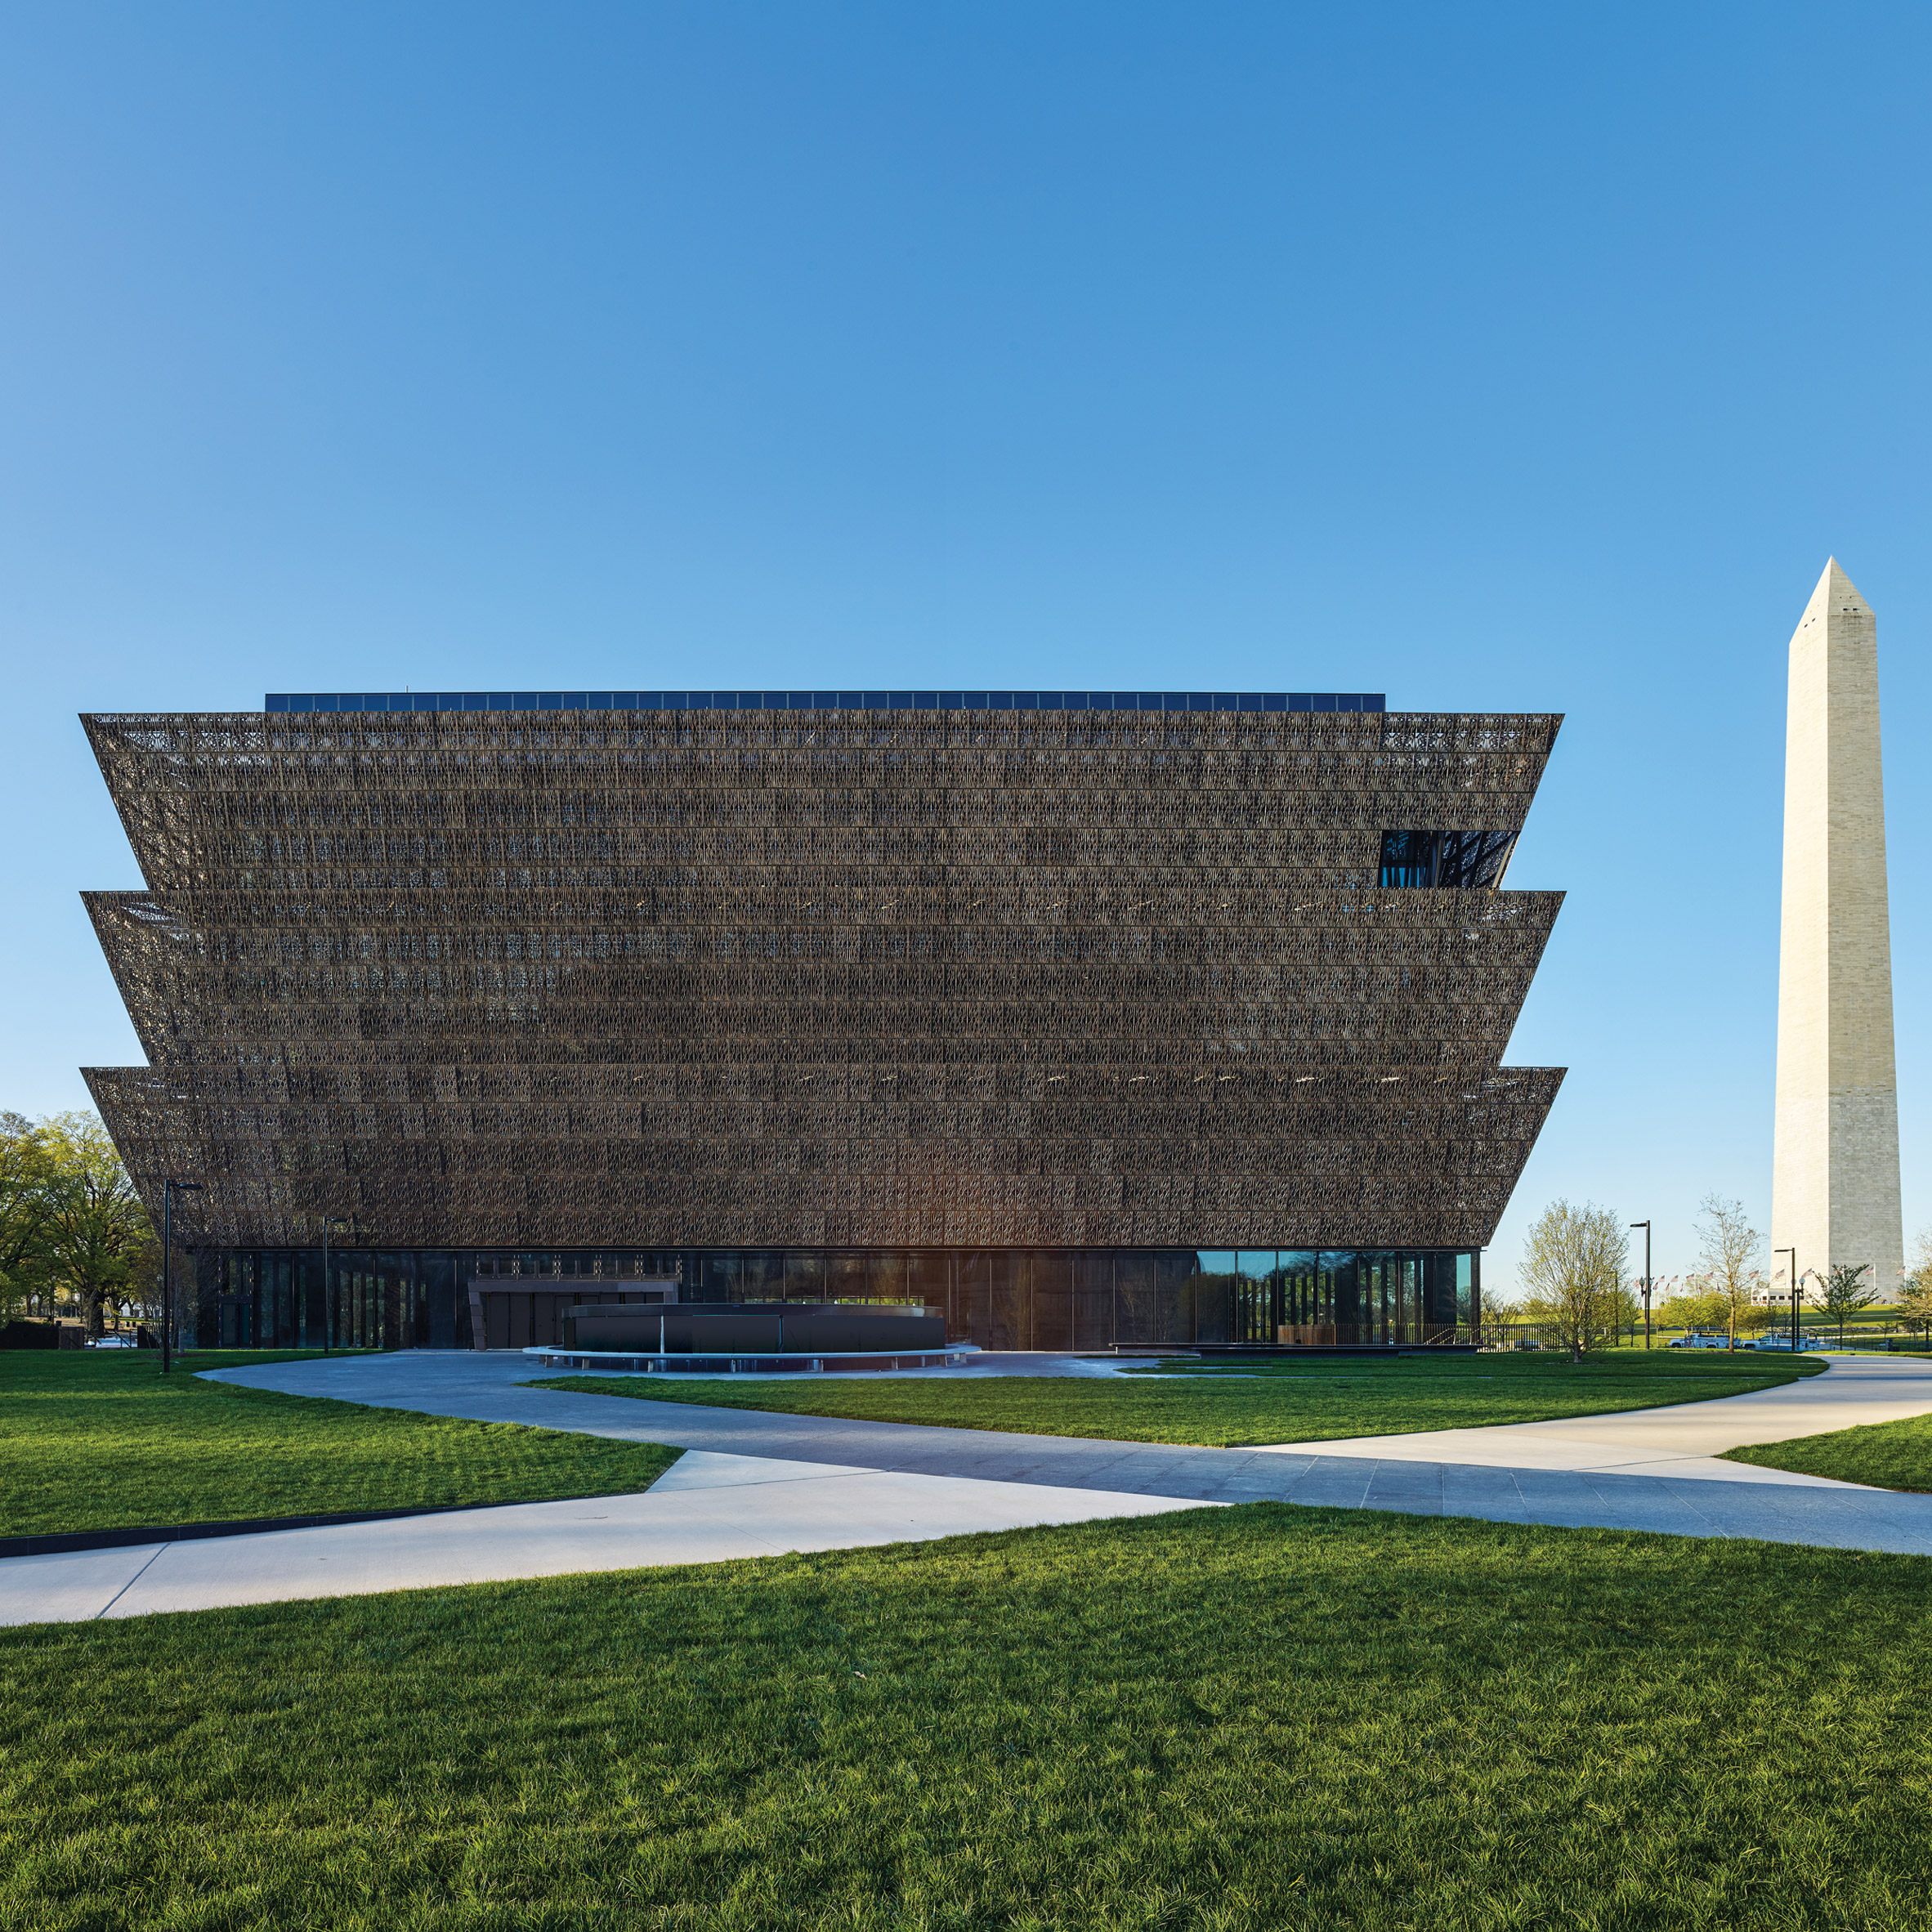 Architecture and design exhibitions guide: David Adjaye Making Memory